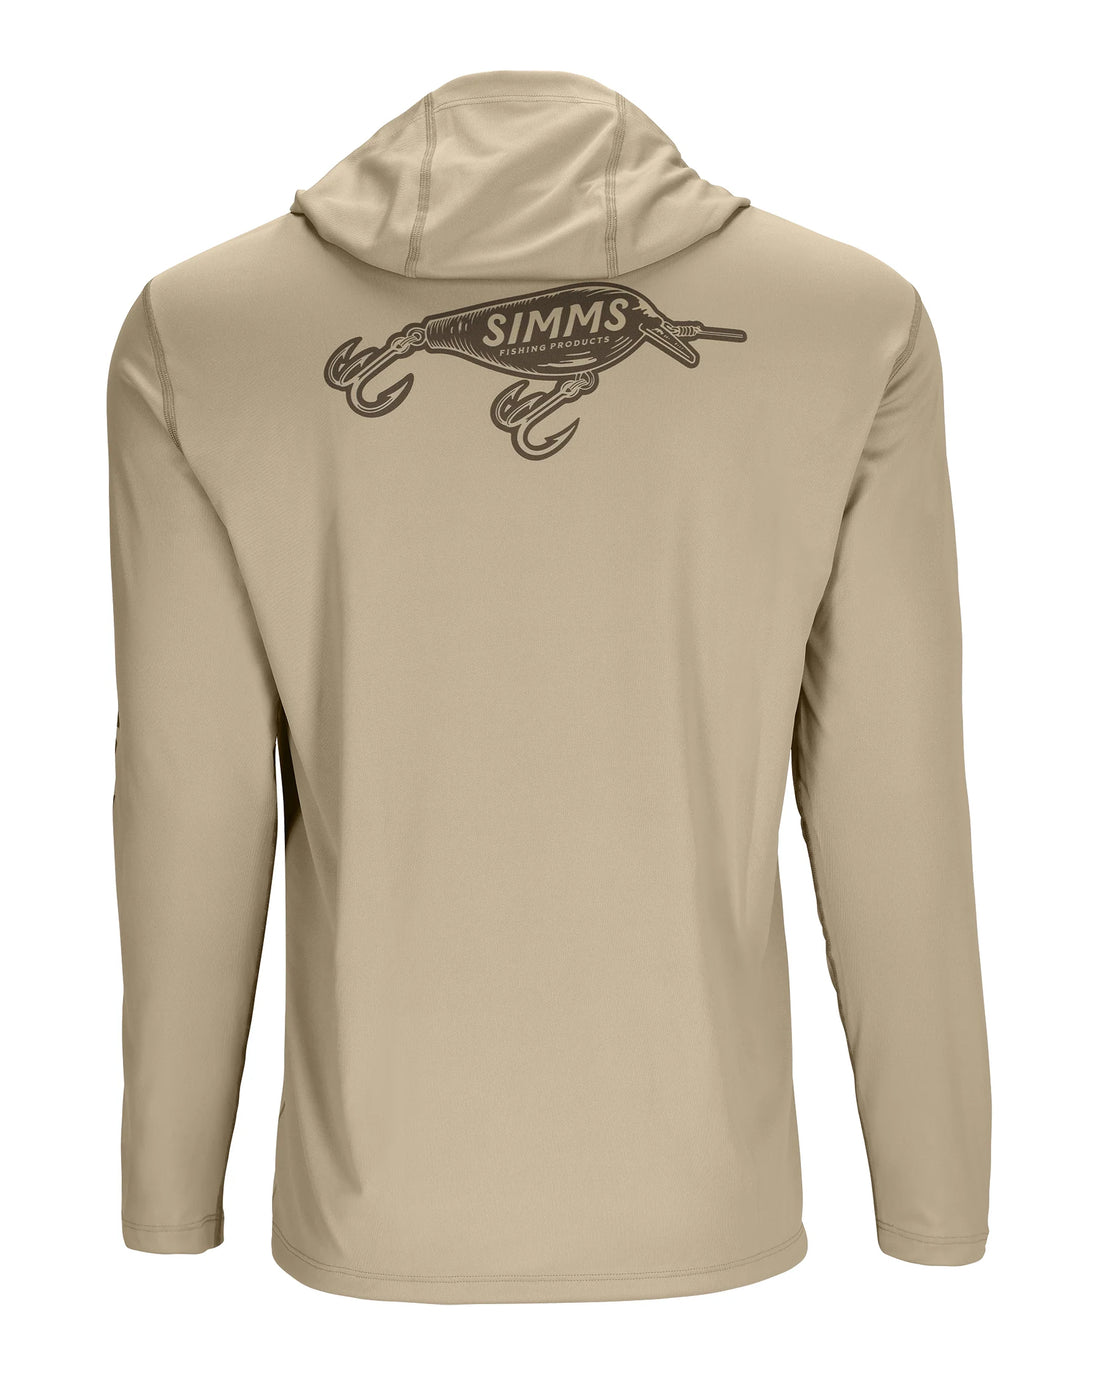 Simms Men's Tech Hoody - Stone with Lure